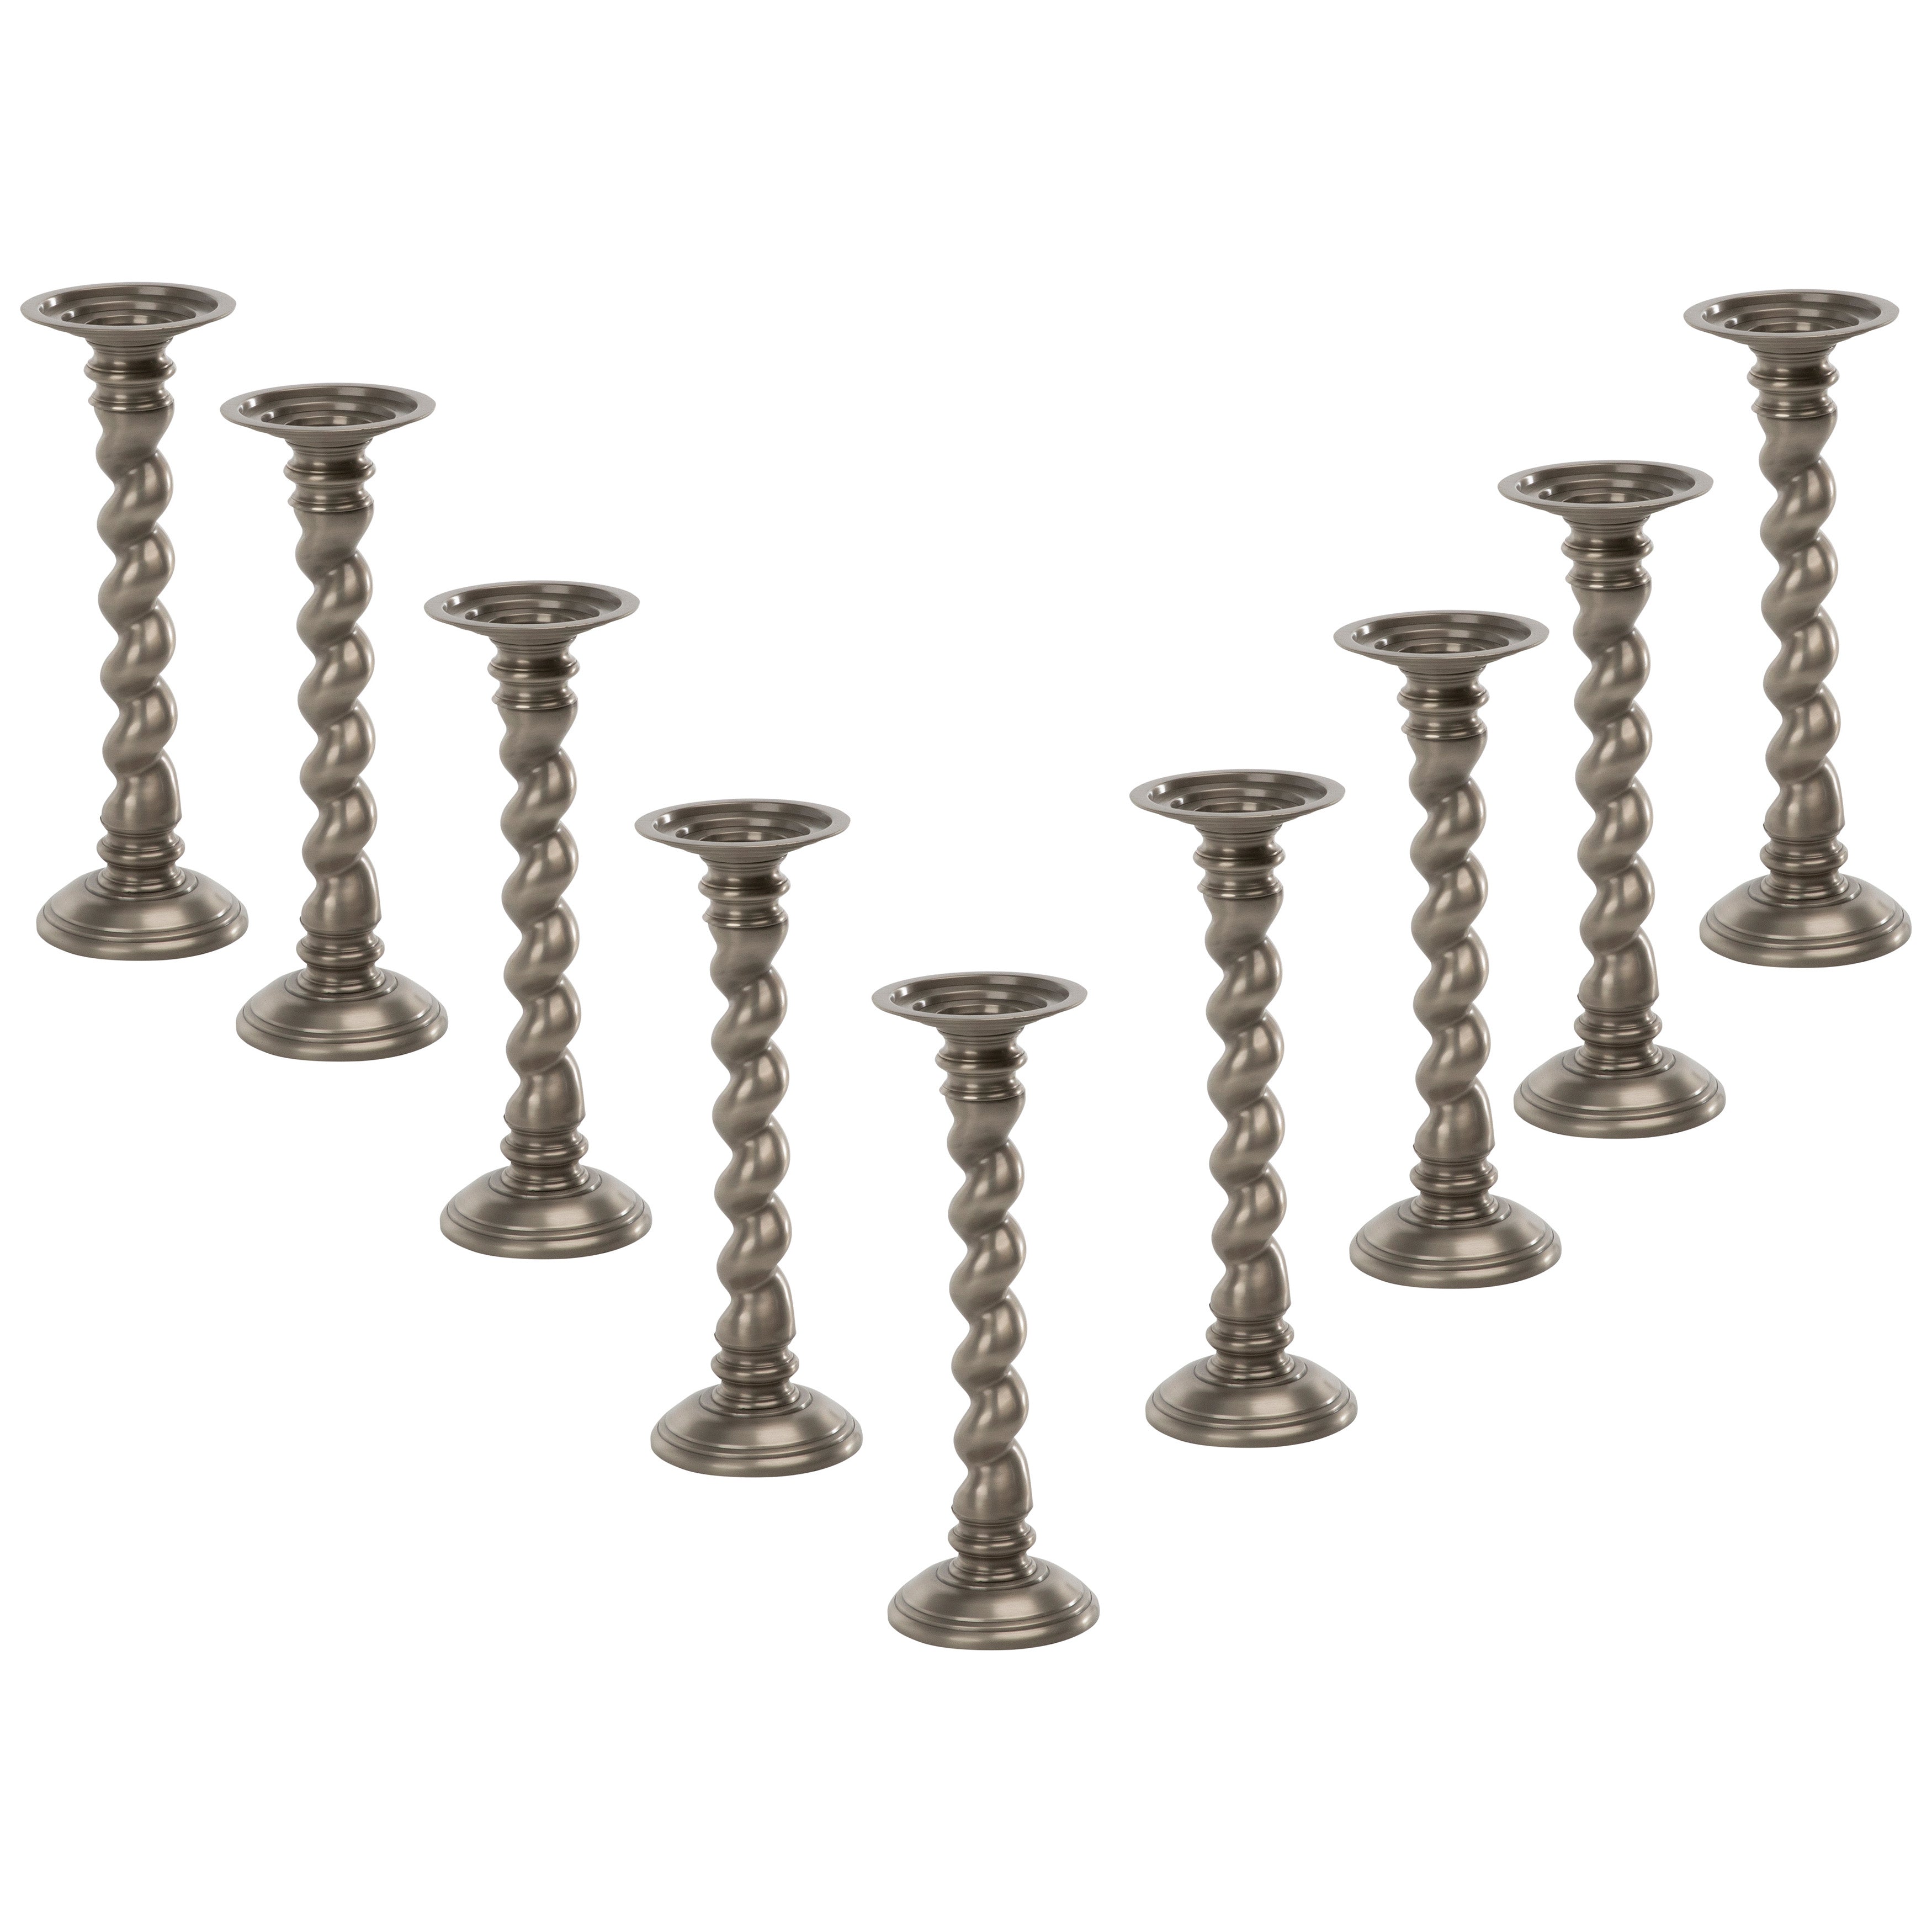 Candle Stand Pewter Finish  Set of 9 - What A Room